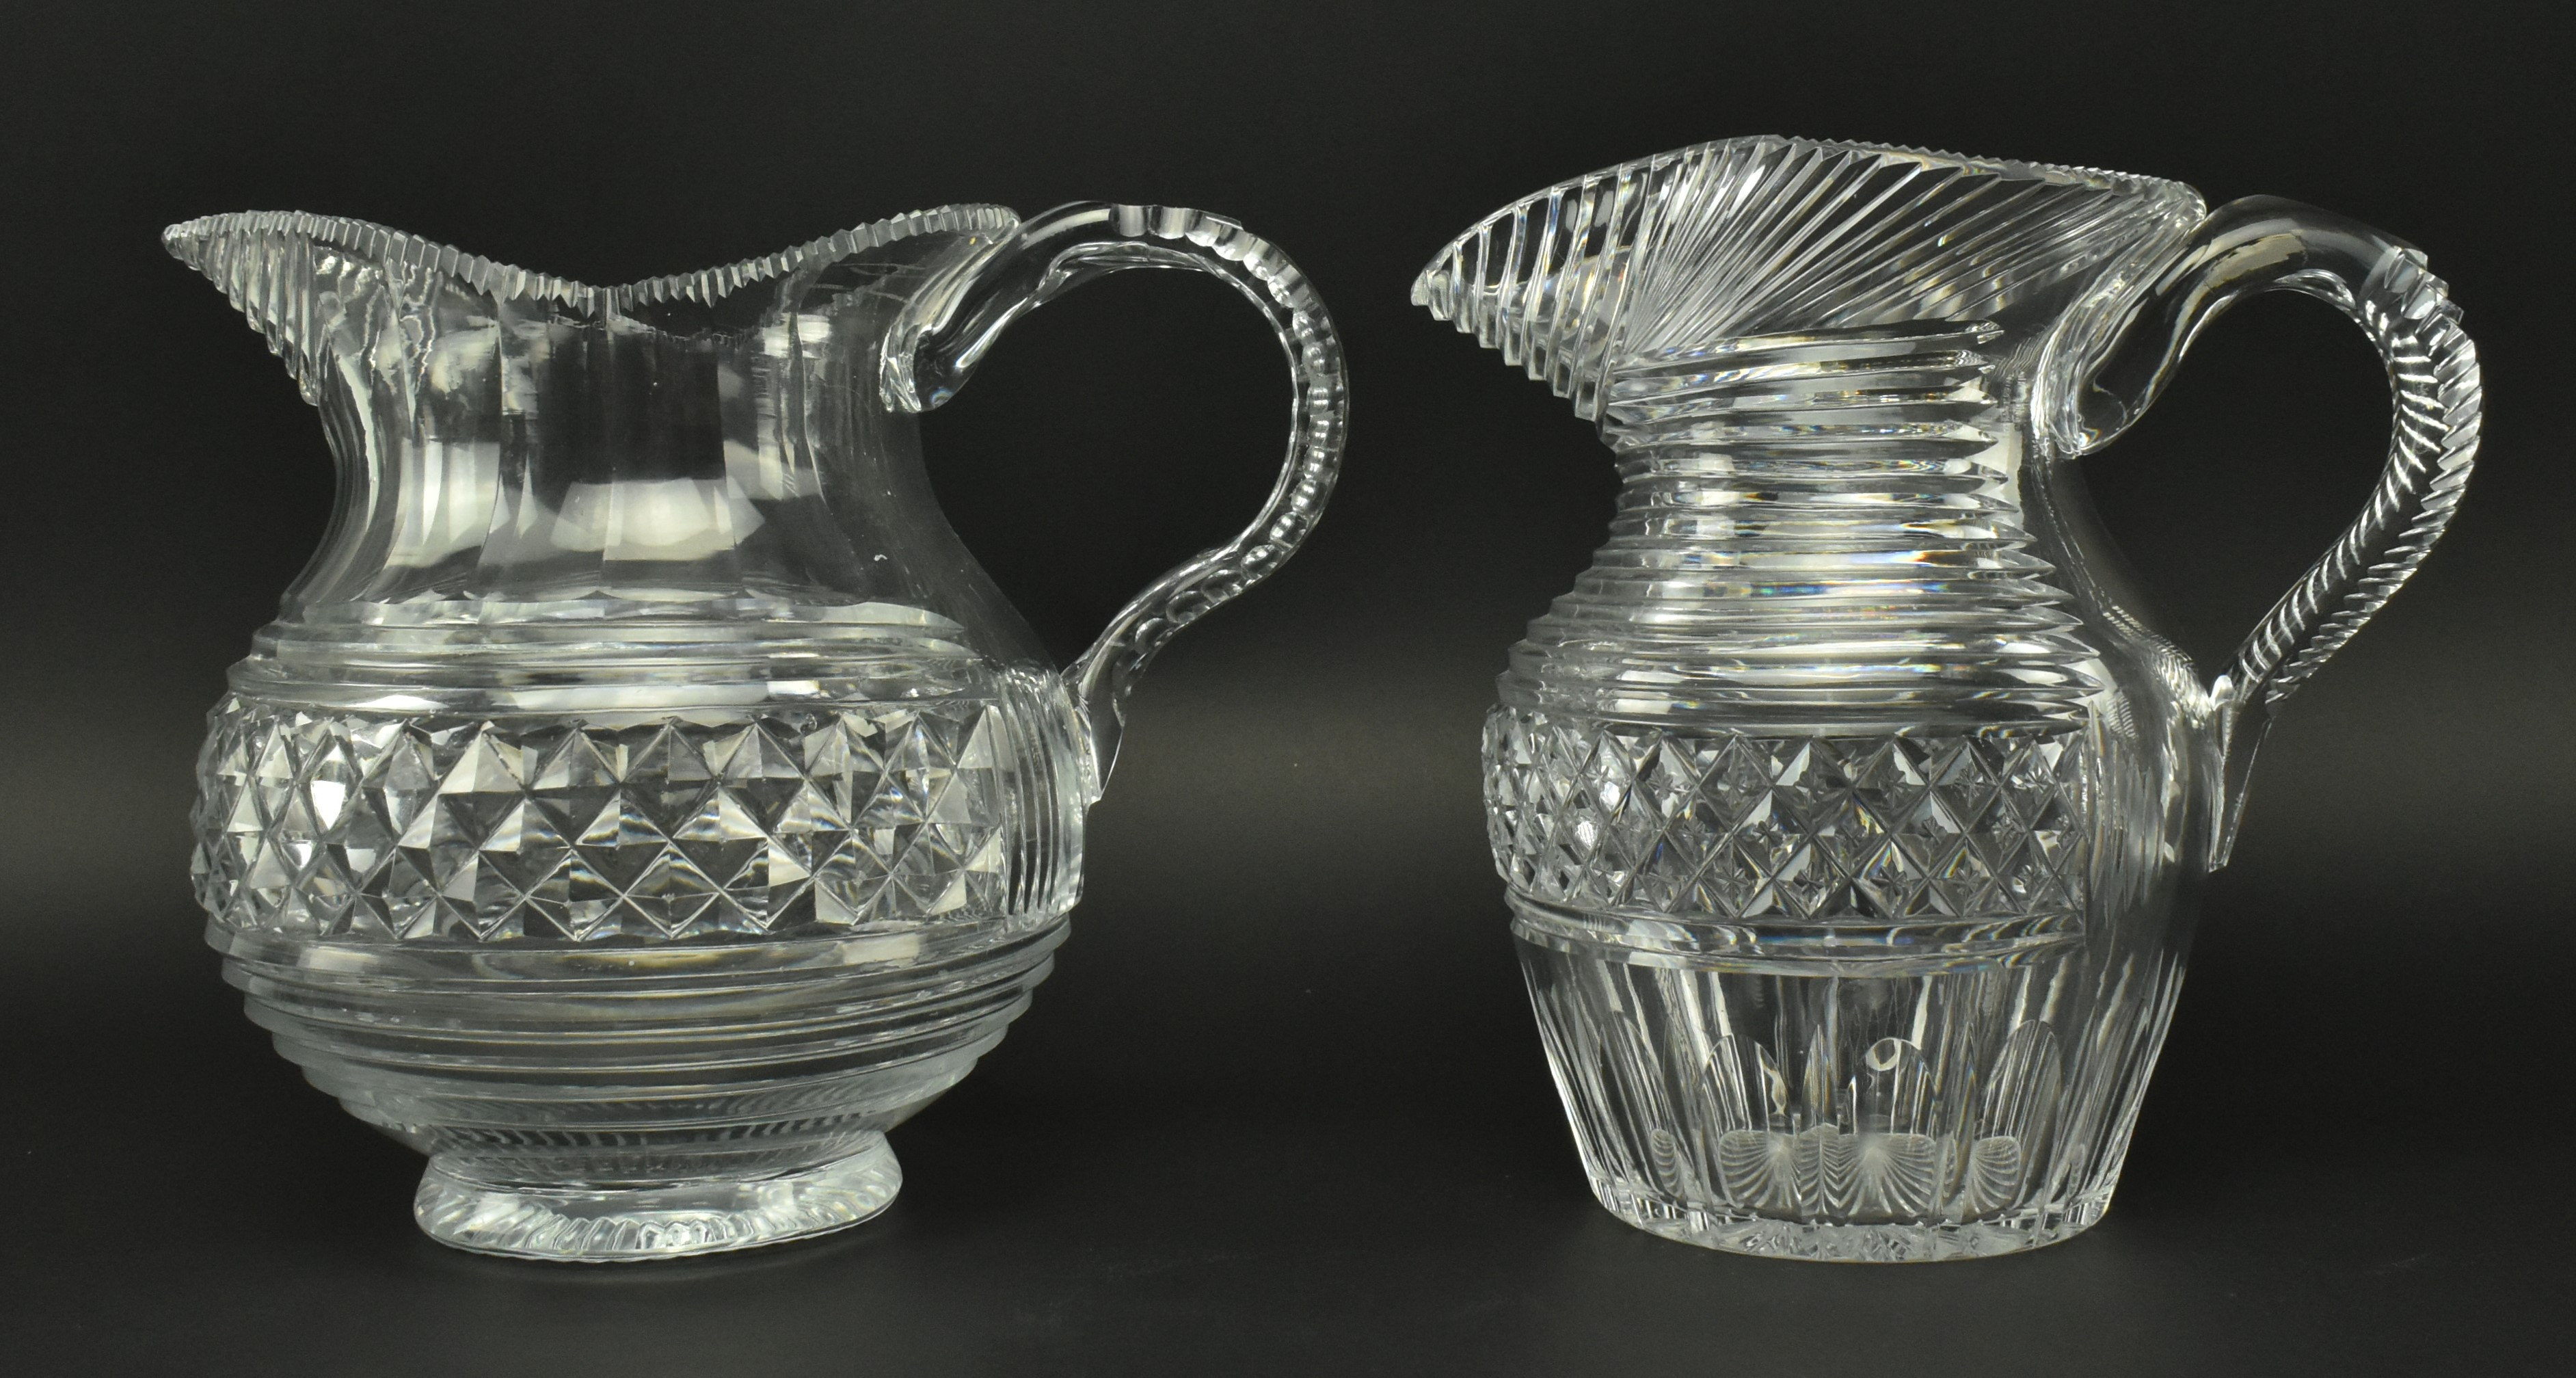 FOUR EARLY 19TH CENTURY GLASS JUGS WITH STEP CUT DESIGN - Image 2 of 11